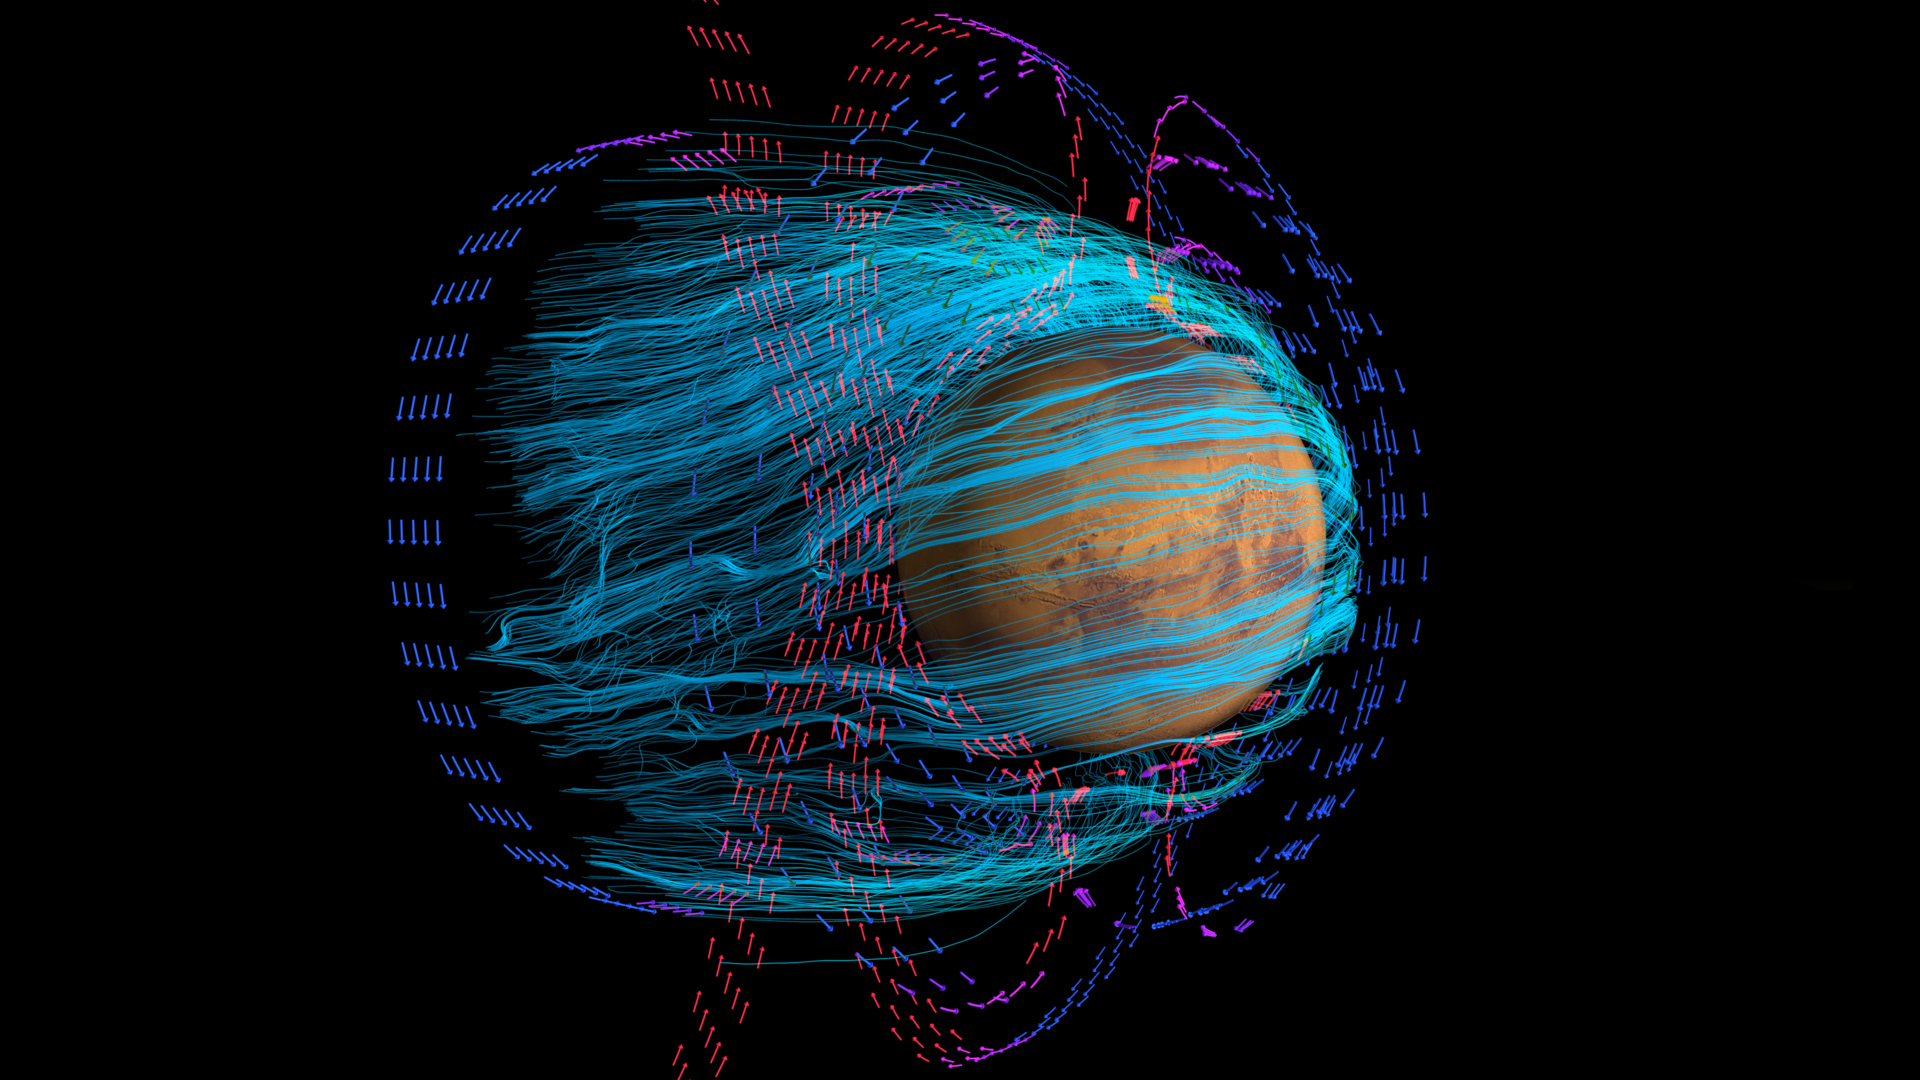 MAVEN data have enabled the first map of the electric current systems (blue and red arrows) that shape the induced magnetic field surrounding Mars.Credit: NASA/Goddard/MAVEN/CU Boulder/SVSUniversal Production Music: “A Lucid Dream” and “Shimmer Oscillations” by James Joshua OttoWatch this video on the NASA Goddard YouTube channel.Complete transcript available.